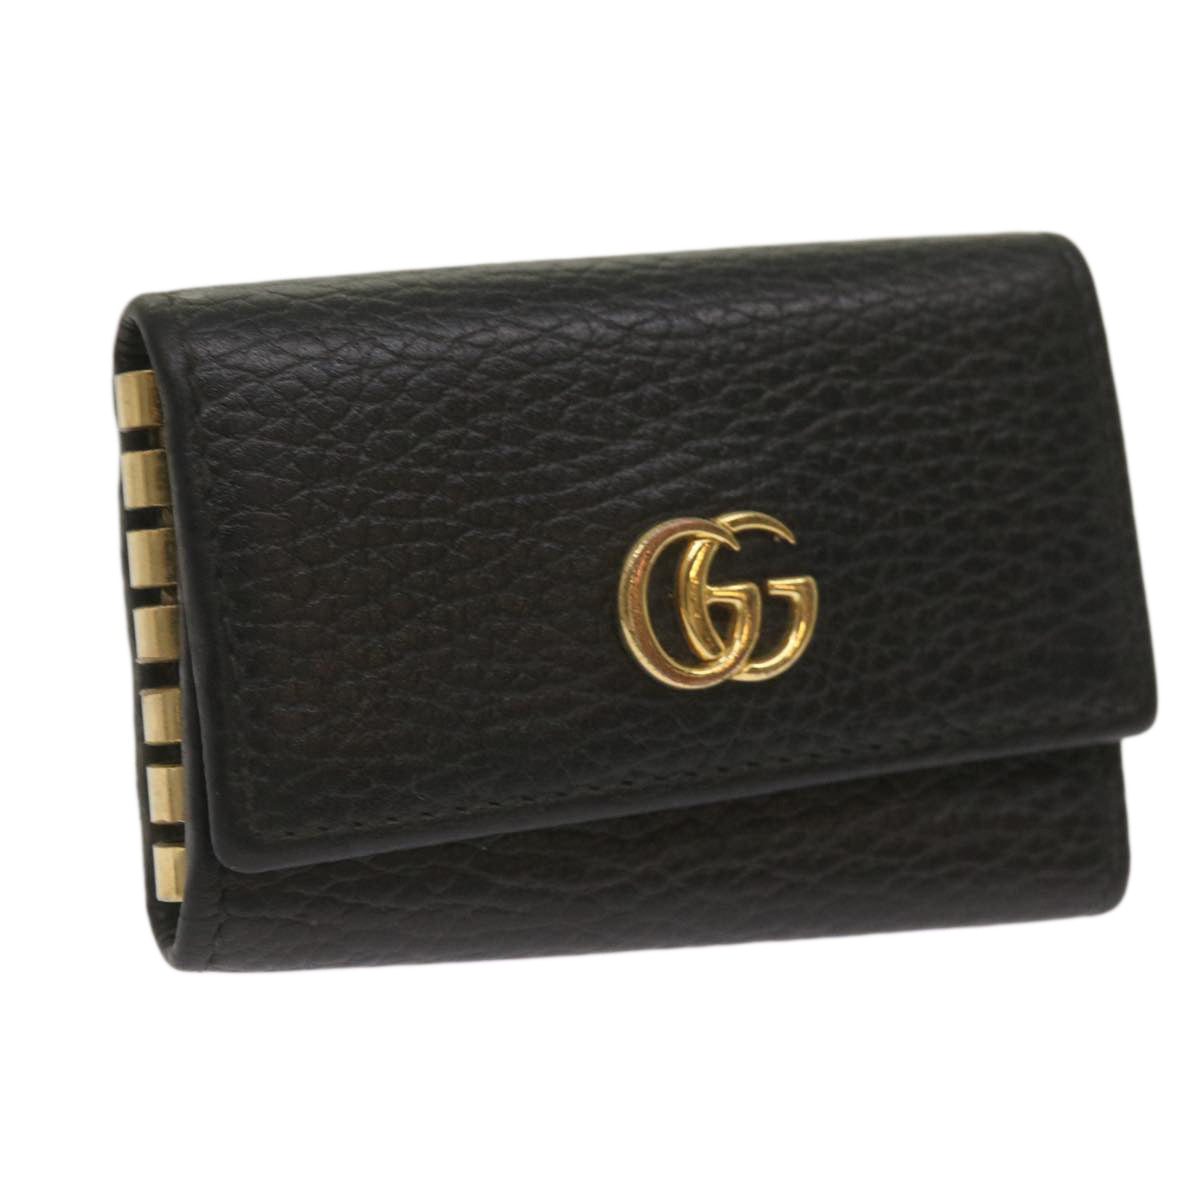 GUCCI GG Marmont Key Case Leather Black 456118 Auth bs11937